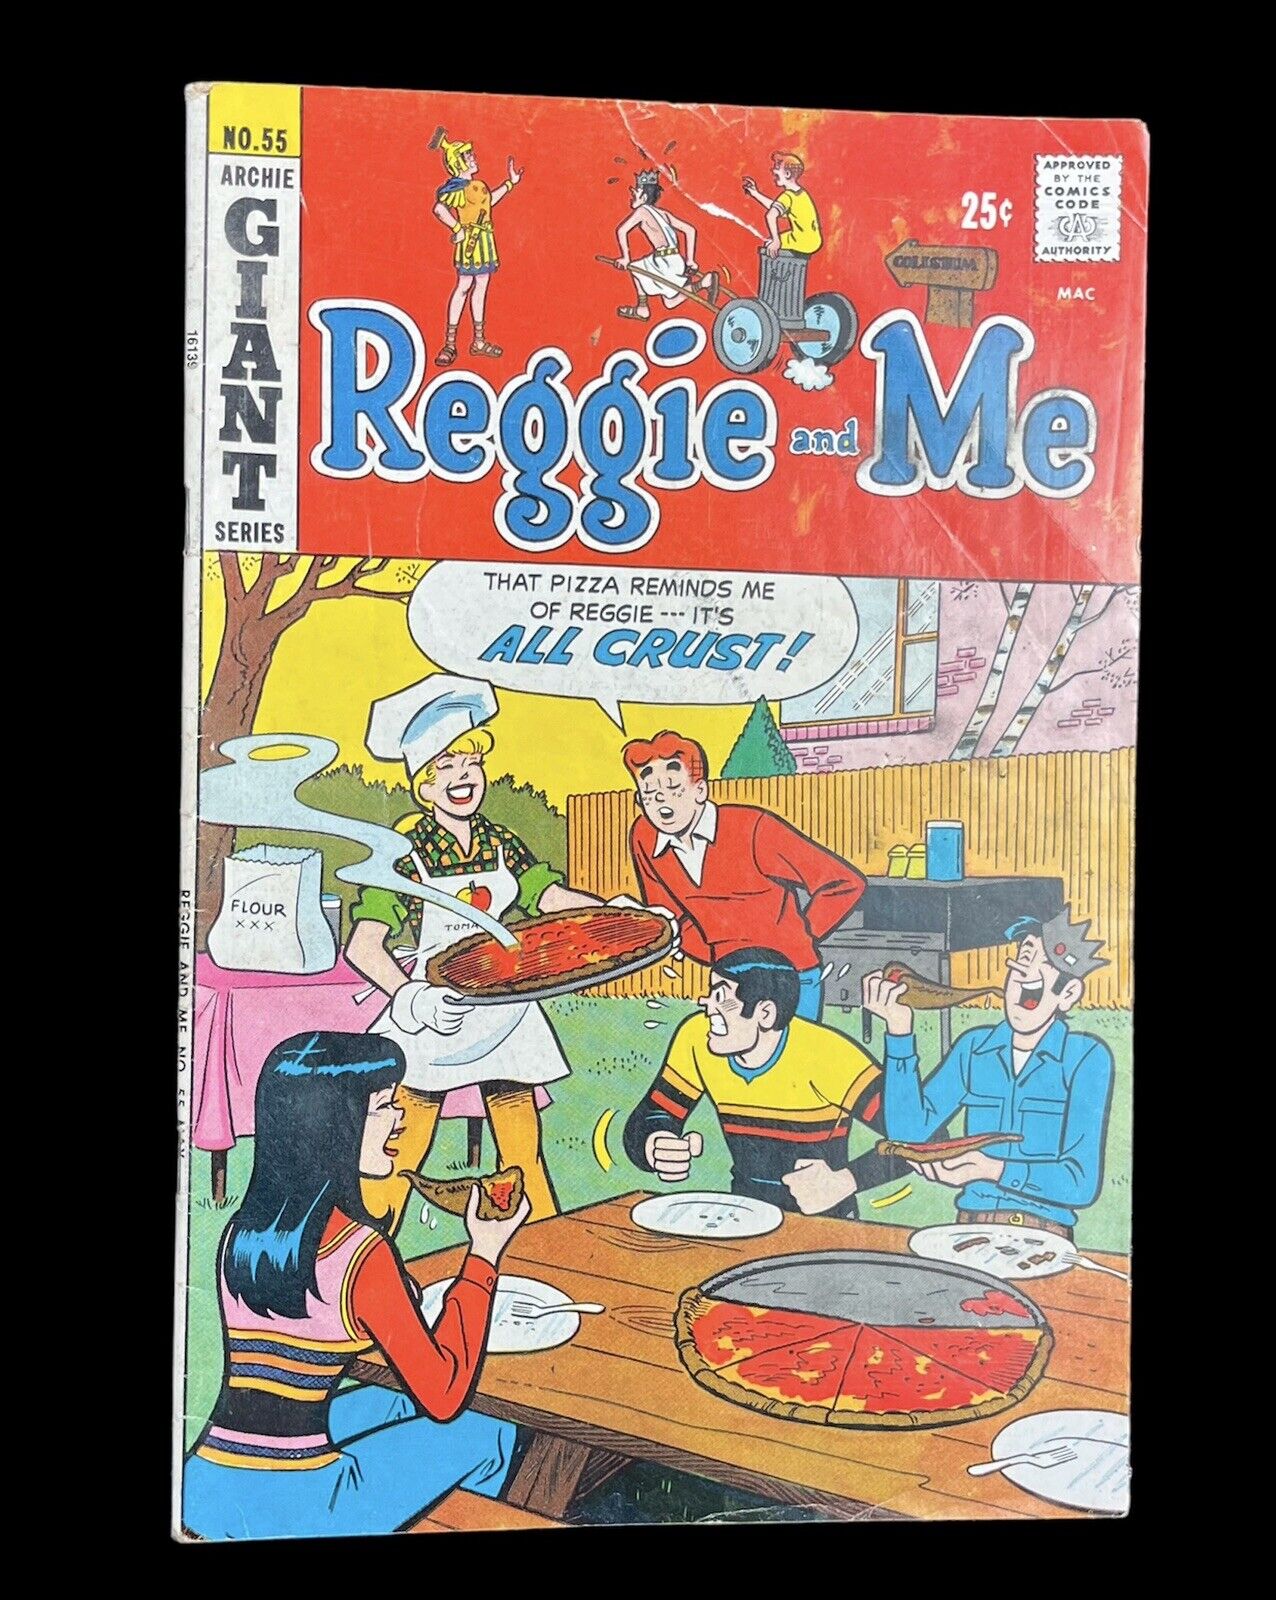 VINTAGE REGGIE AND ME ARCHIE COMICS NO. 55 MAY 1972